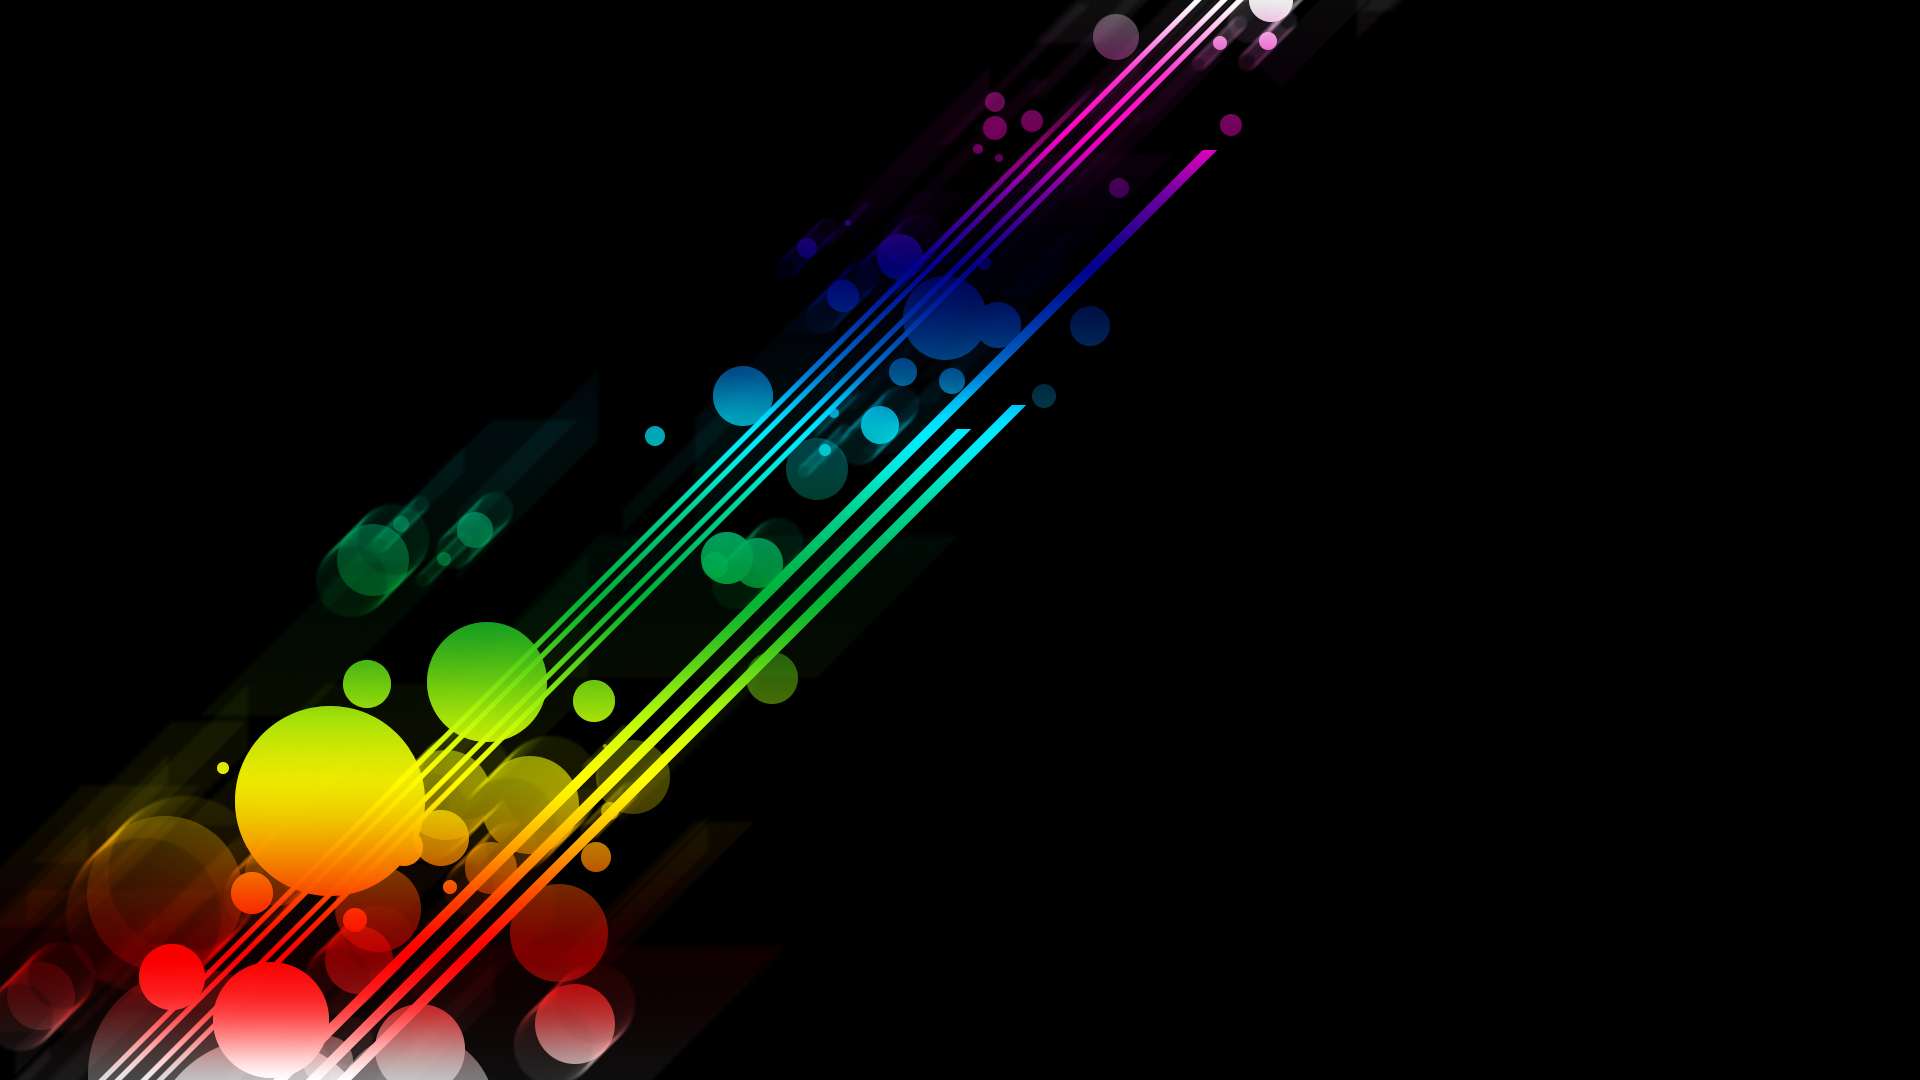 Image For Heart - Cool Black And Rainbow Backgrounds - HD Wallpaper 